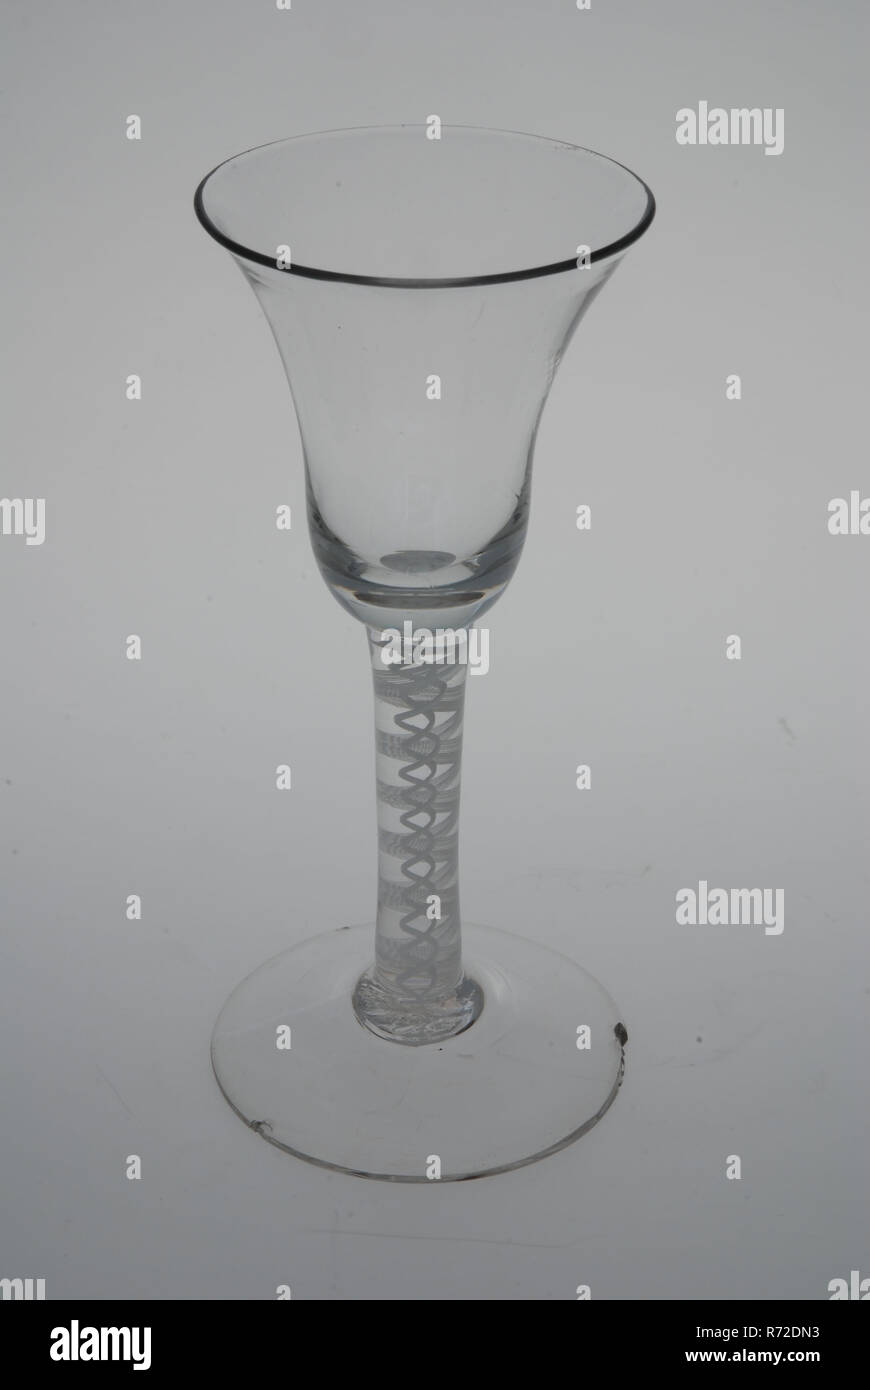 Crystal Glass on a Thin Stem for Wine. Stock Photo - Image of household,  crystal: 139060892